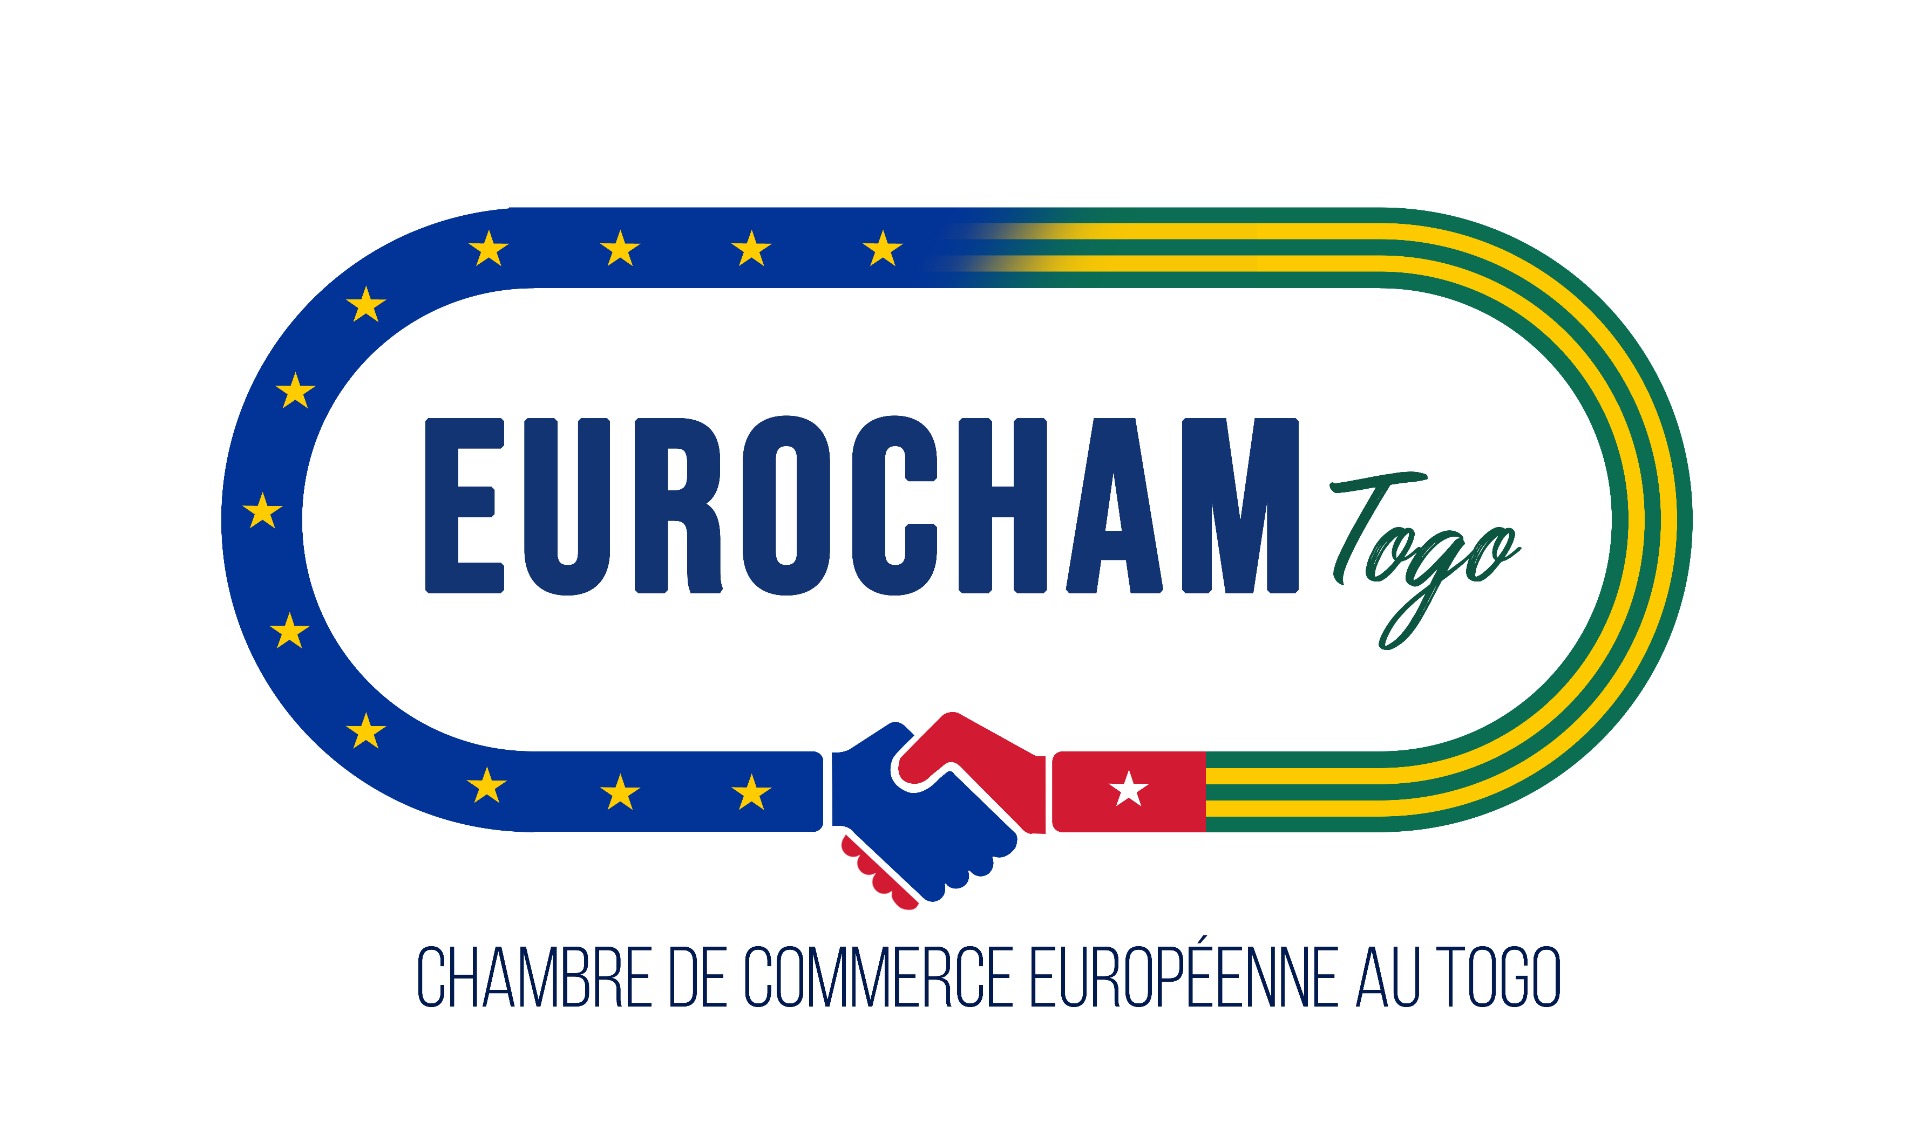 The European Chamber of Commerce of Togo